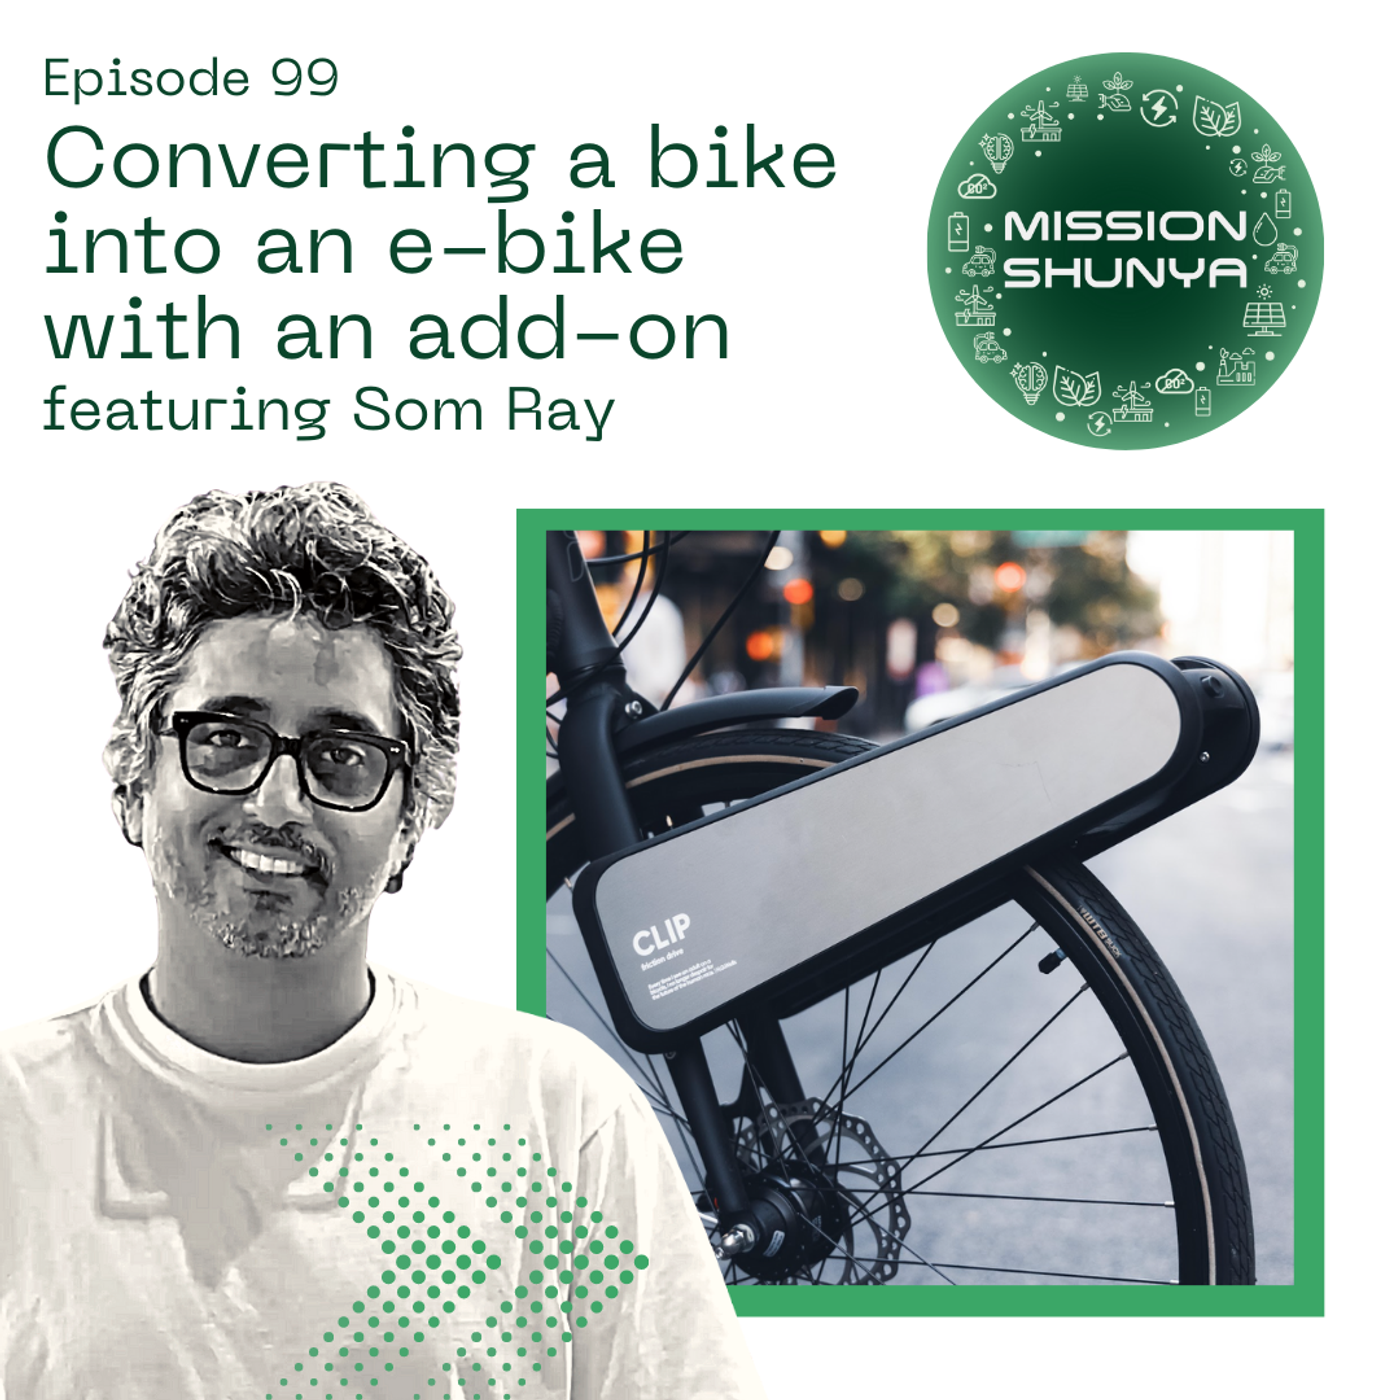 99: Converting a bike into an e-bike with an add-on ft. Som Ray, Clip